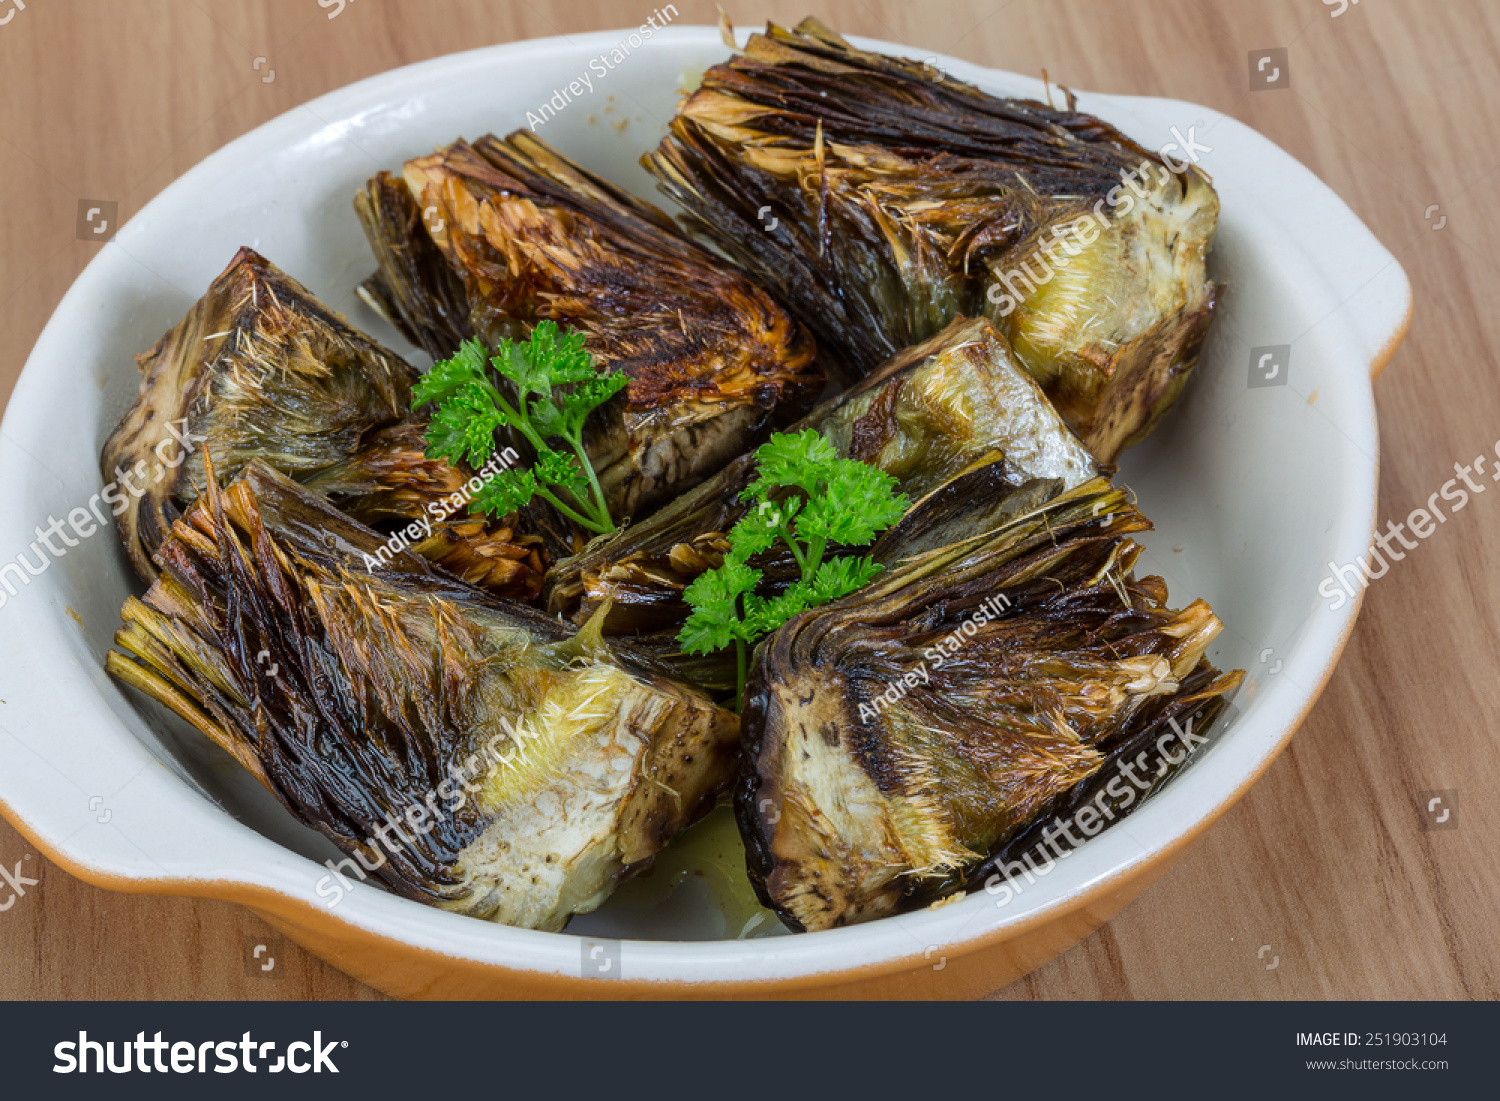 Grilled artishokes with parsley on the wood background #251903104